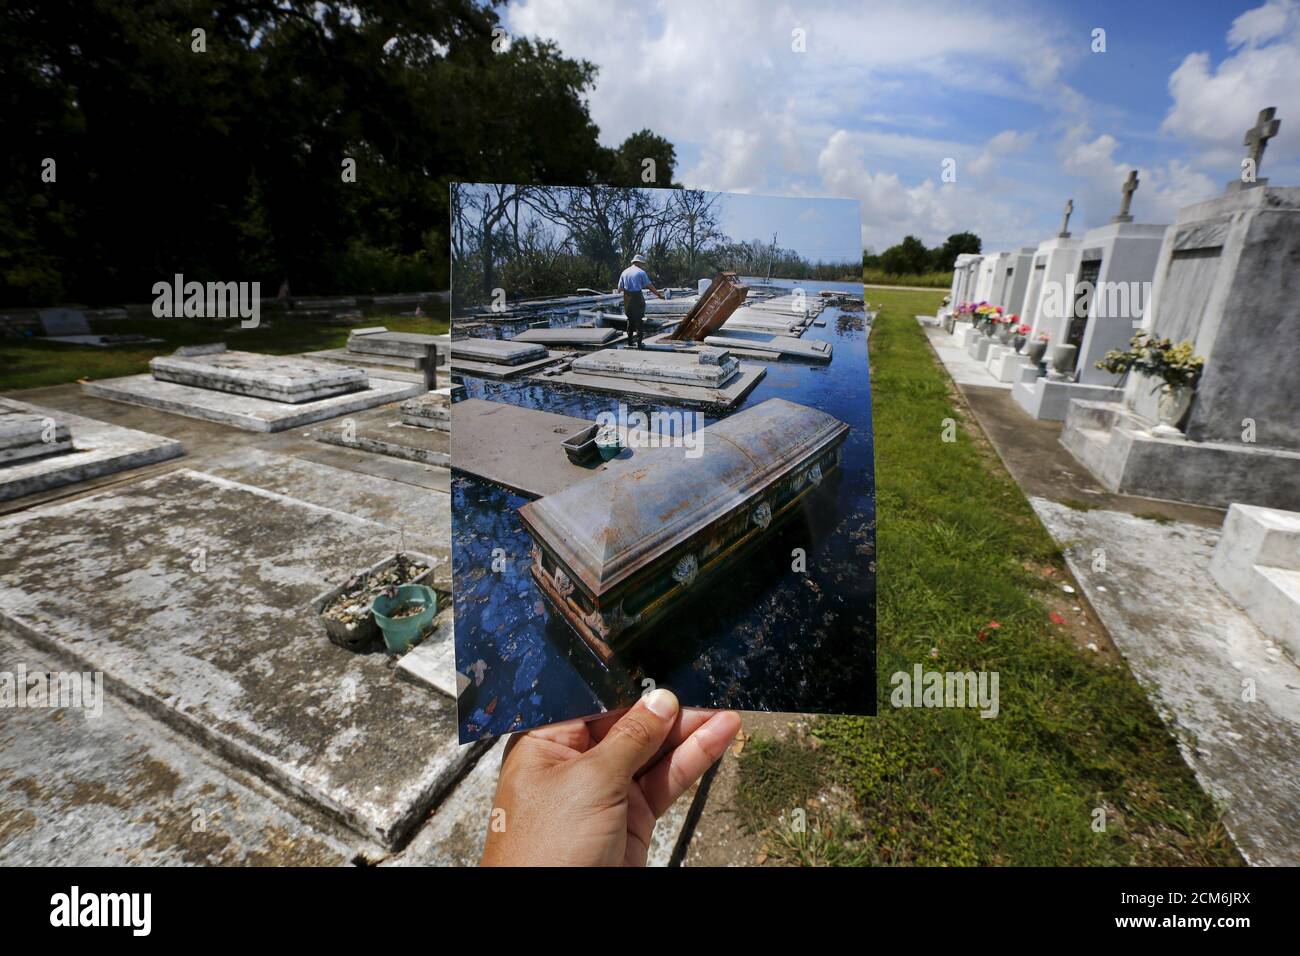 Photographer Carlos Barria holds a print of a photograph he took in 2005, as he matches it up at the same location 10 years on, in New Orleans, United States, August 18, 2015. The print shows coffins removed from tombs, September 10, 2005, after Hurricane Katrina struck. In 2005, Hurricane Katrina triggered floods that inundated New Orleans and killed more than 1,500 people as storm waters overwhelmed levees and broke through floodwalls. Congress authorised spending more than $14 billion to beef up the city's flood protection after Katrina and built a series of new barriers that include manmad Stock Photo